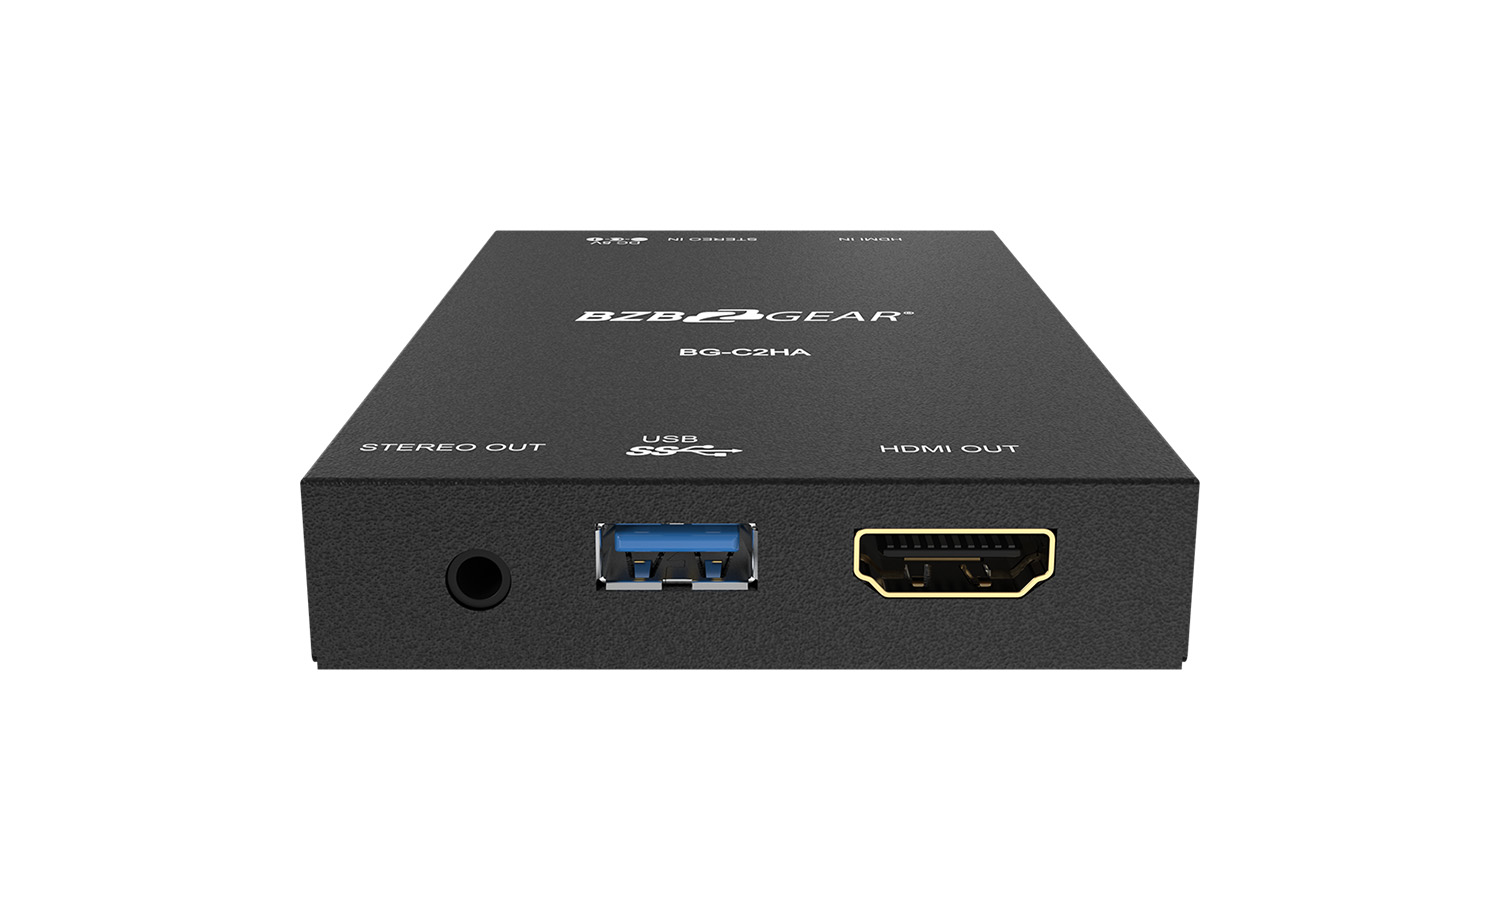 BG-C2HA USB 3.0 Full HD Video Capture Device with HDMI 2.0a Loopout and Audio by BZBGEAR